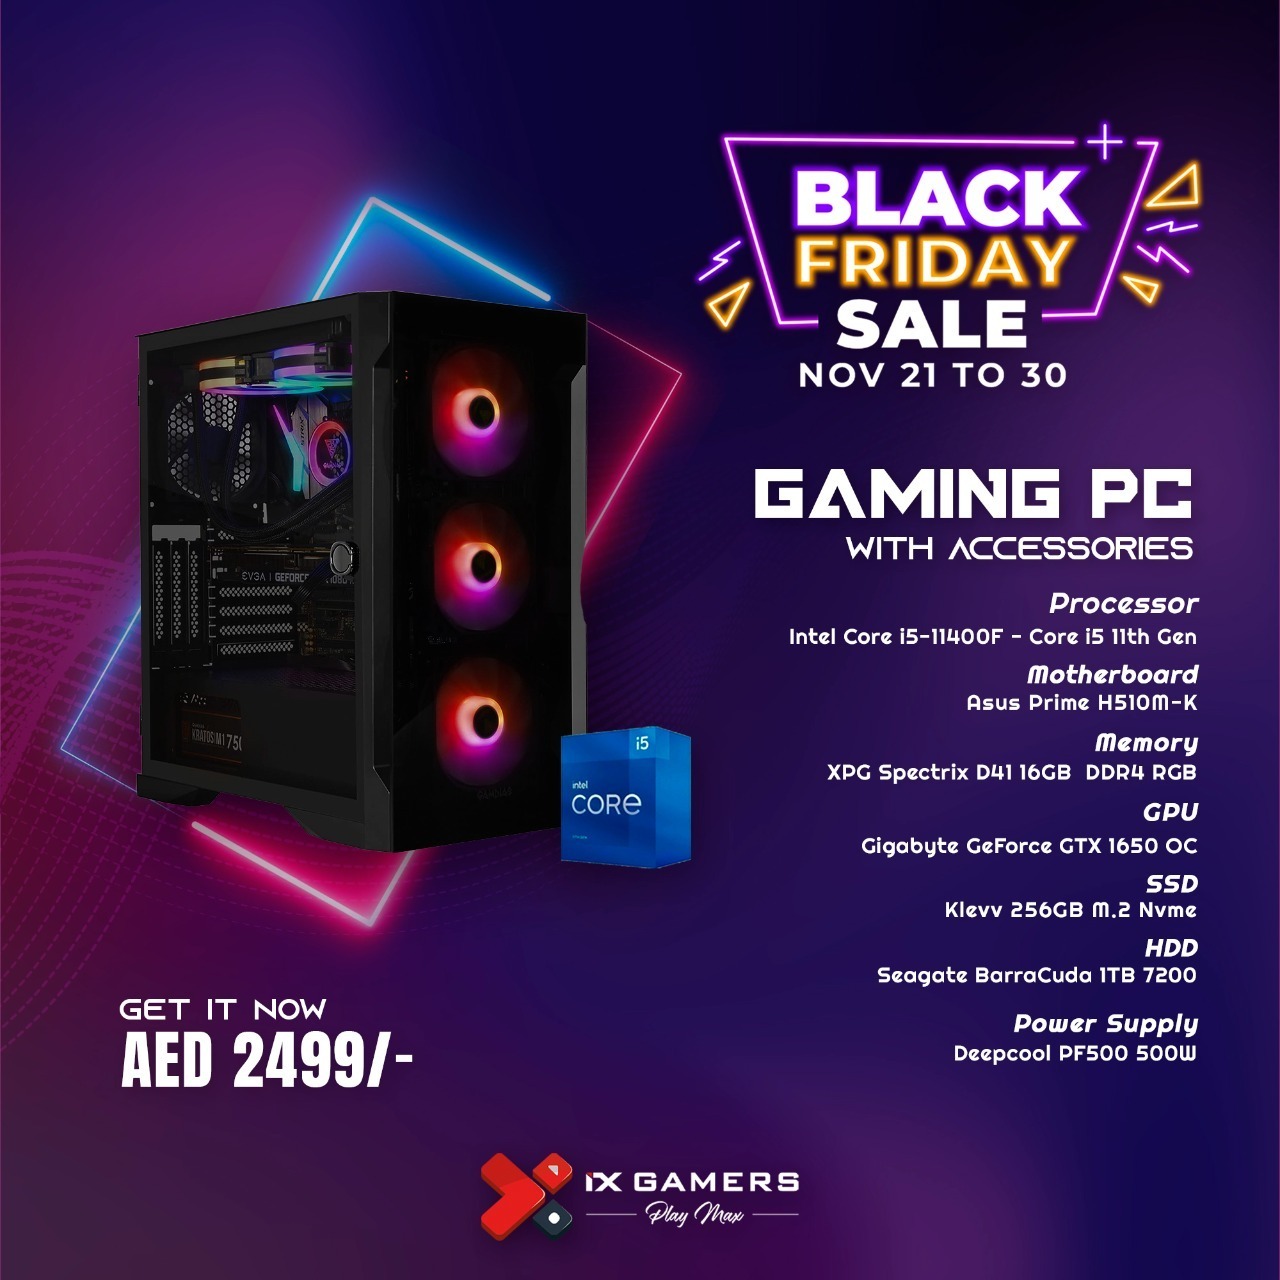 Black Friday Offer - Gaming PC for AED 2499/-